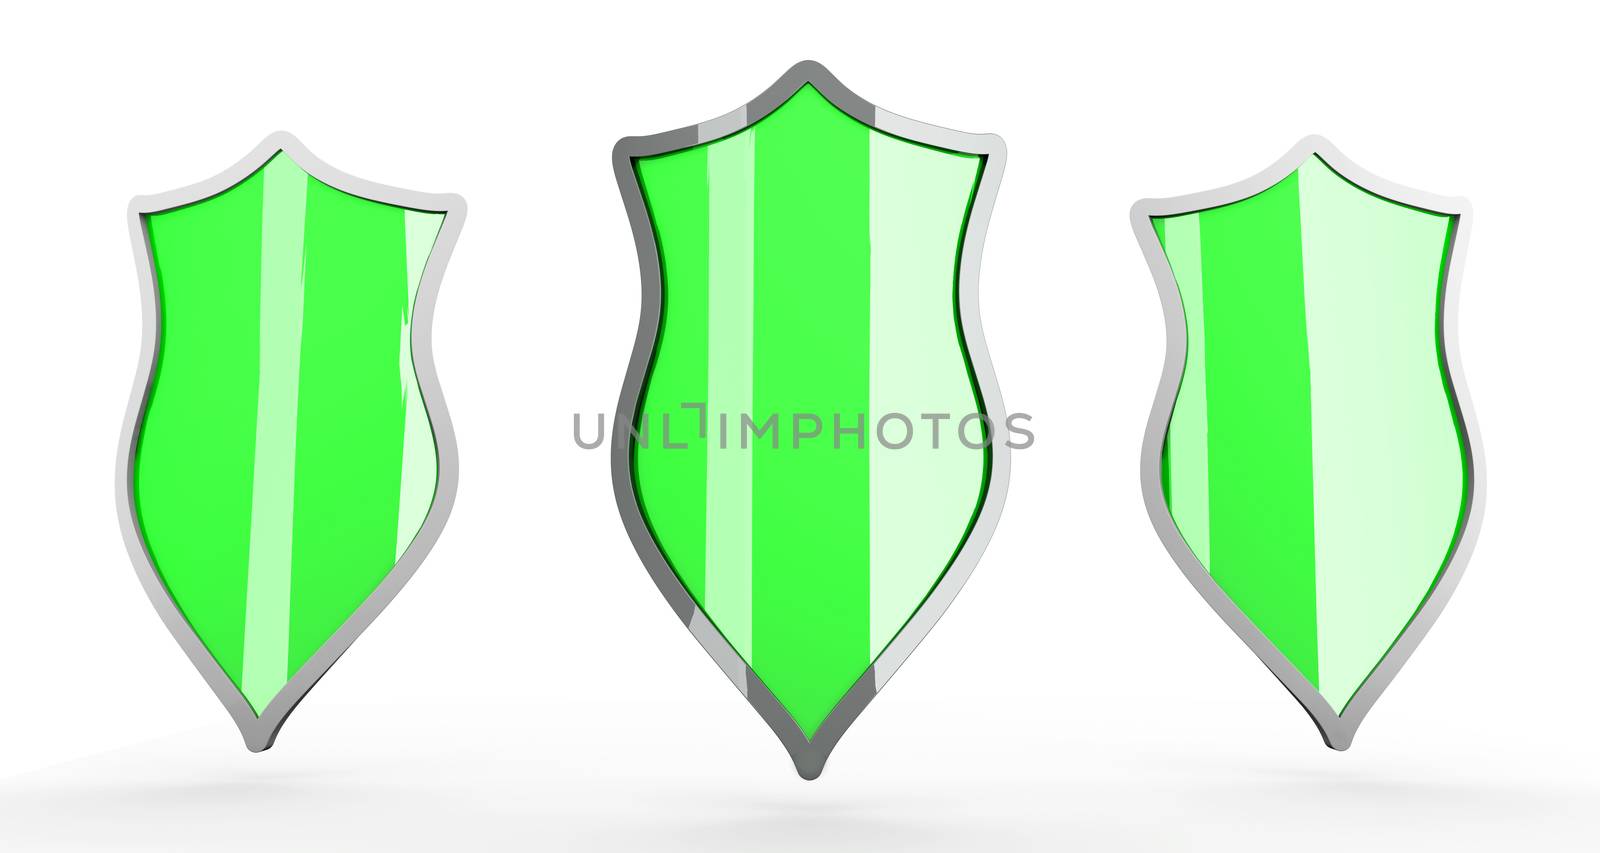 Shields by Spectral